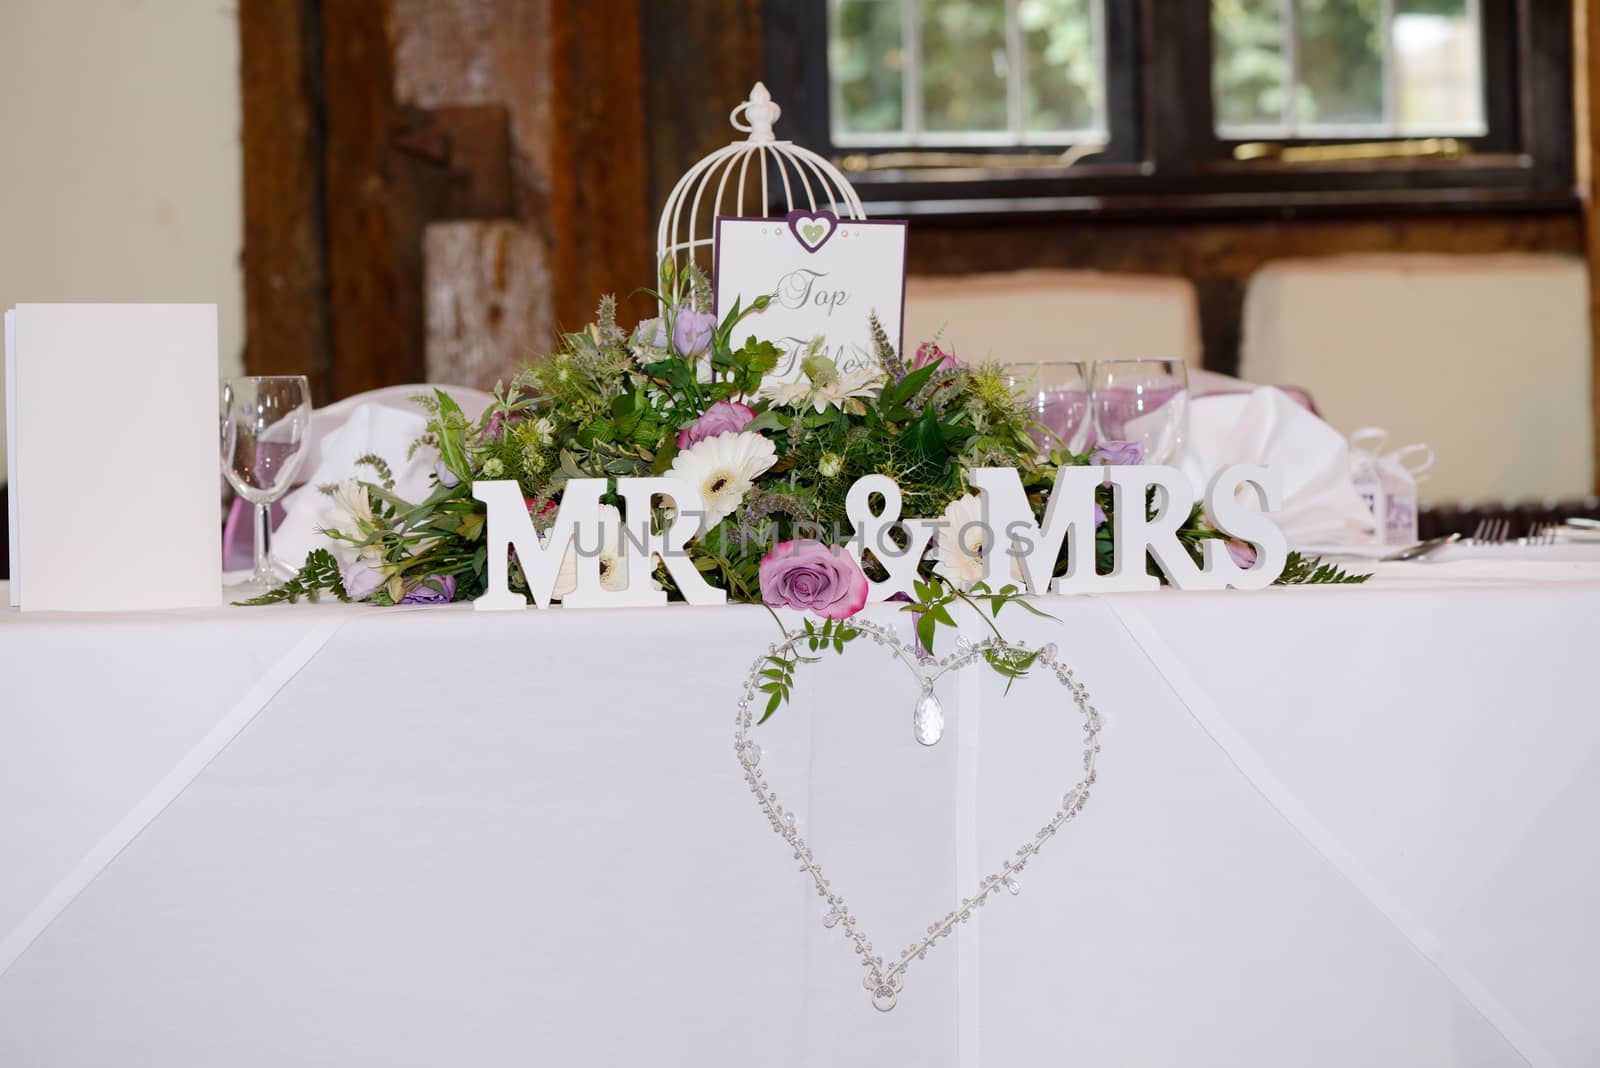 Mr & Mrs decoration at wedding reception with detail of heart and jewels